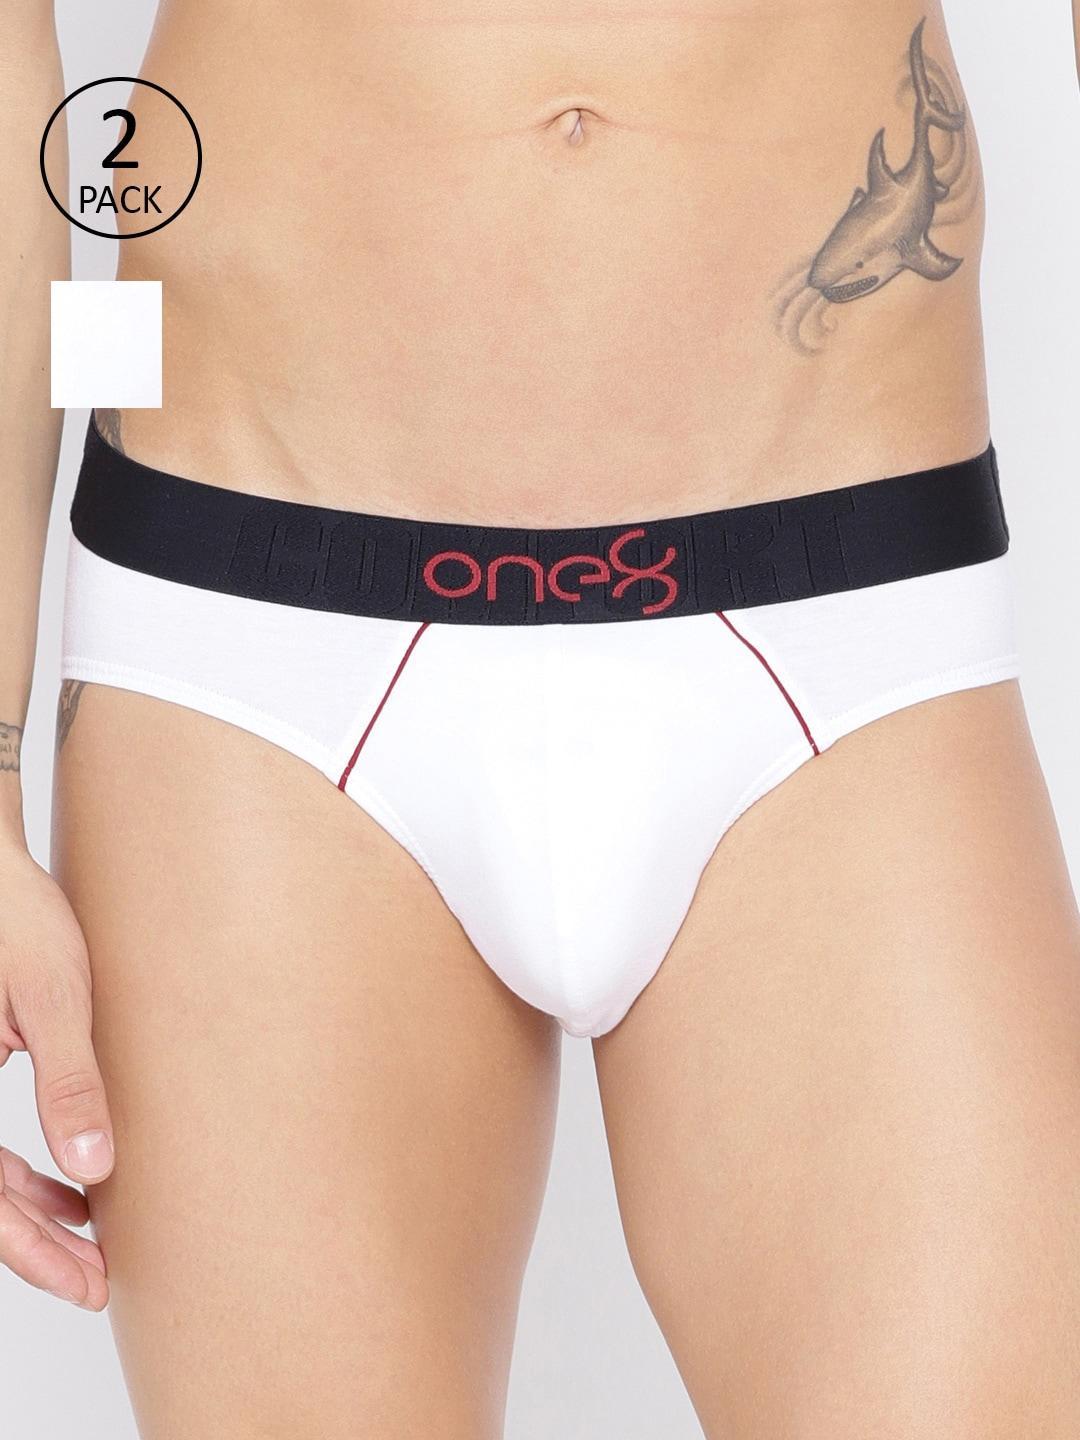 one8 by Virat Kohli Men Pack of 2 Solid Low-Rise Briefs